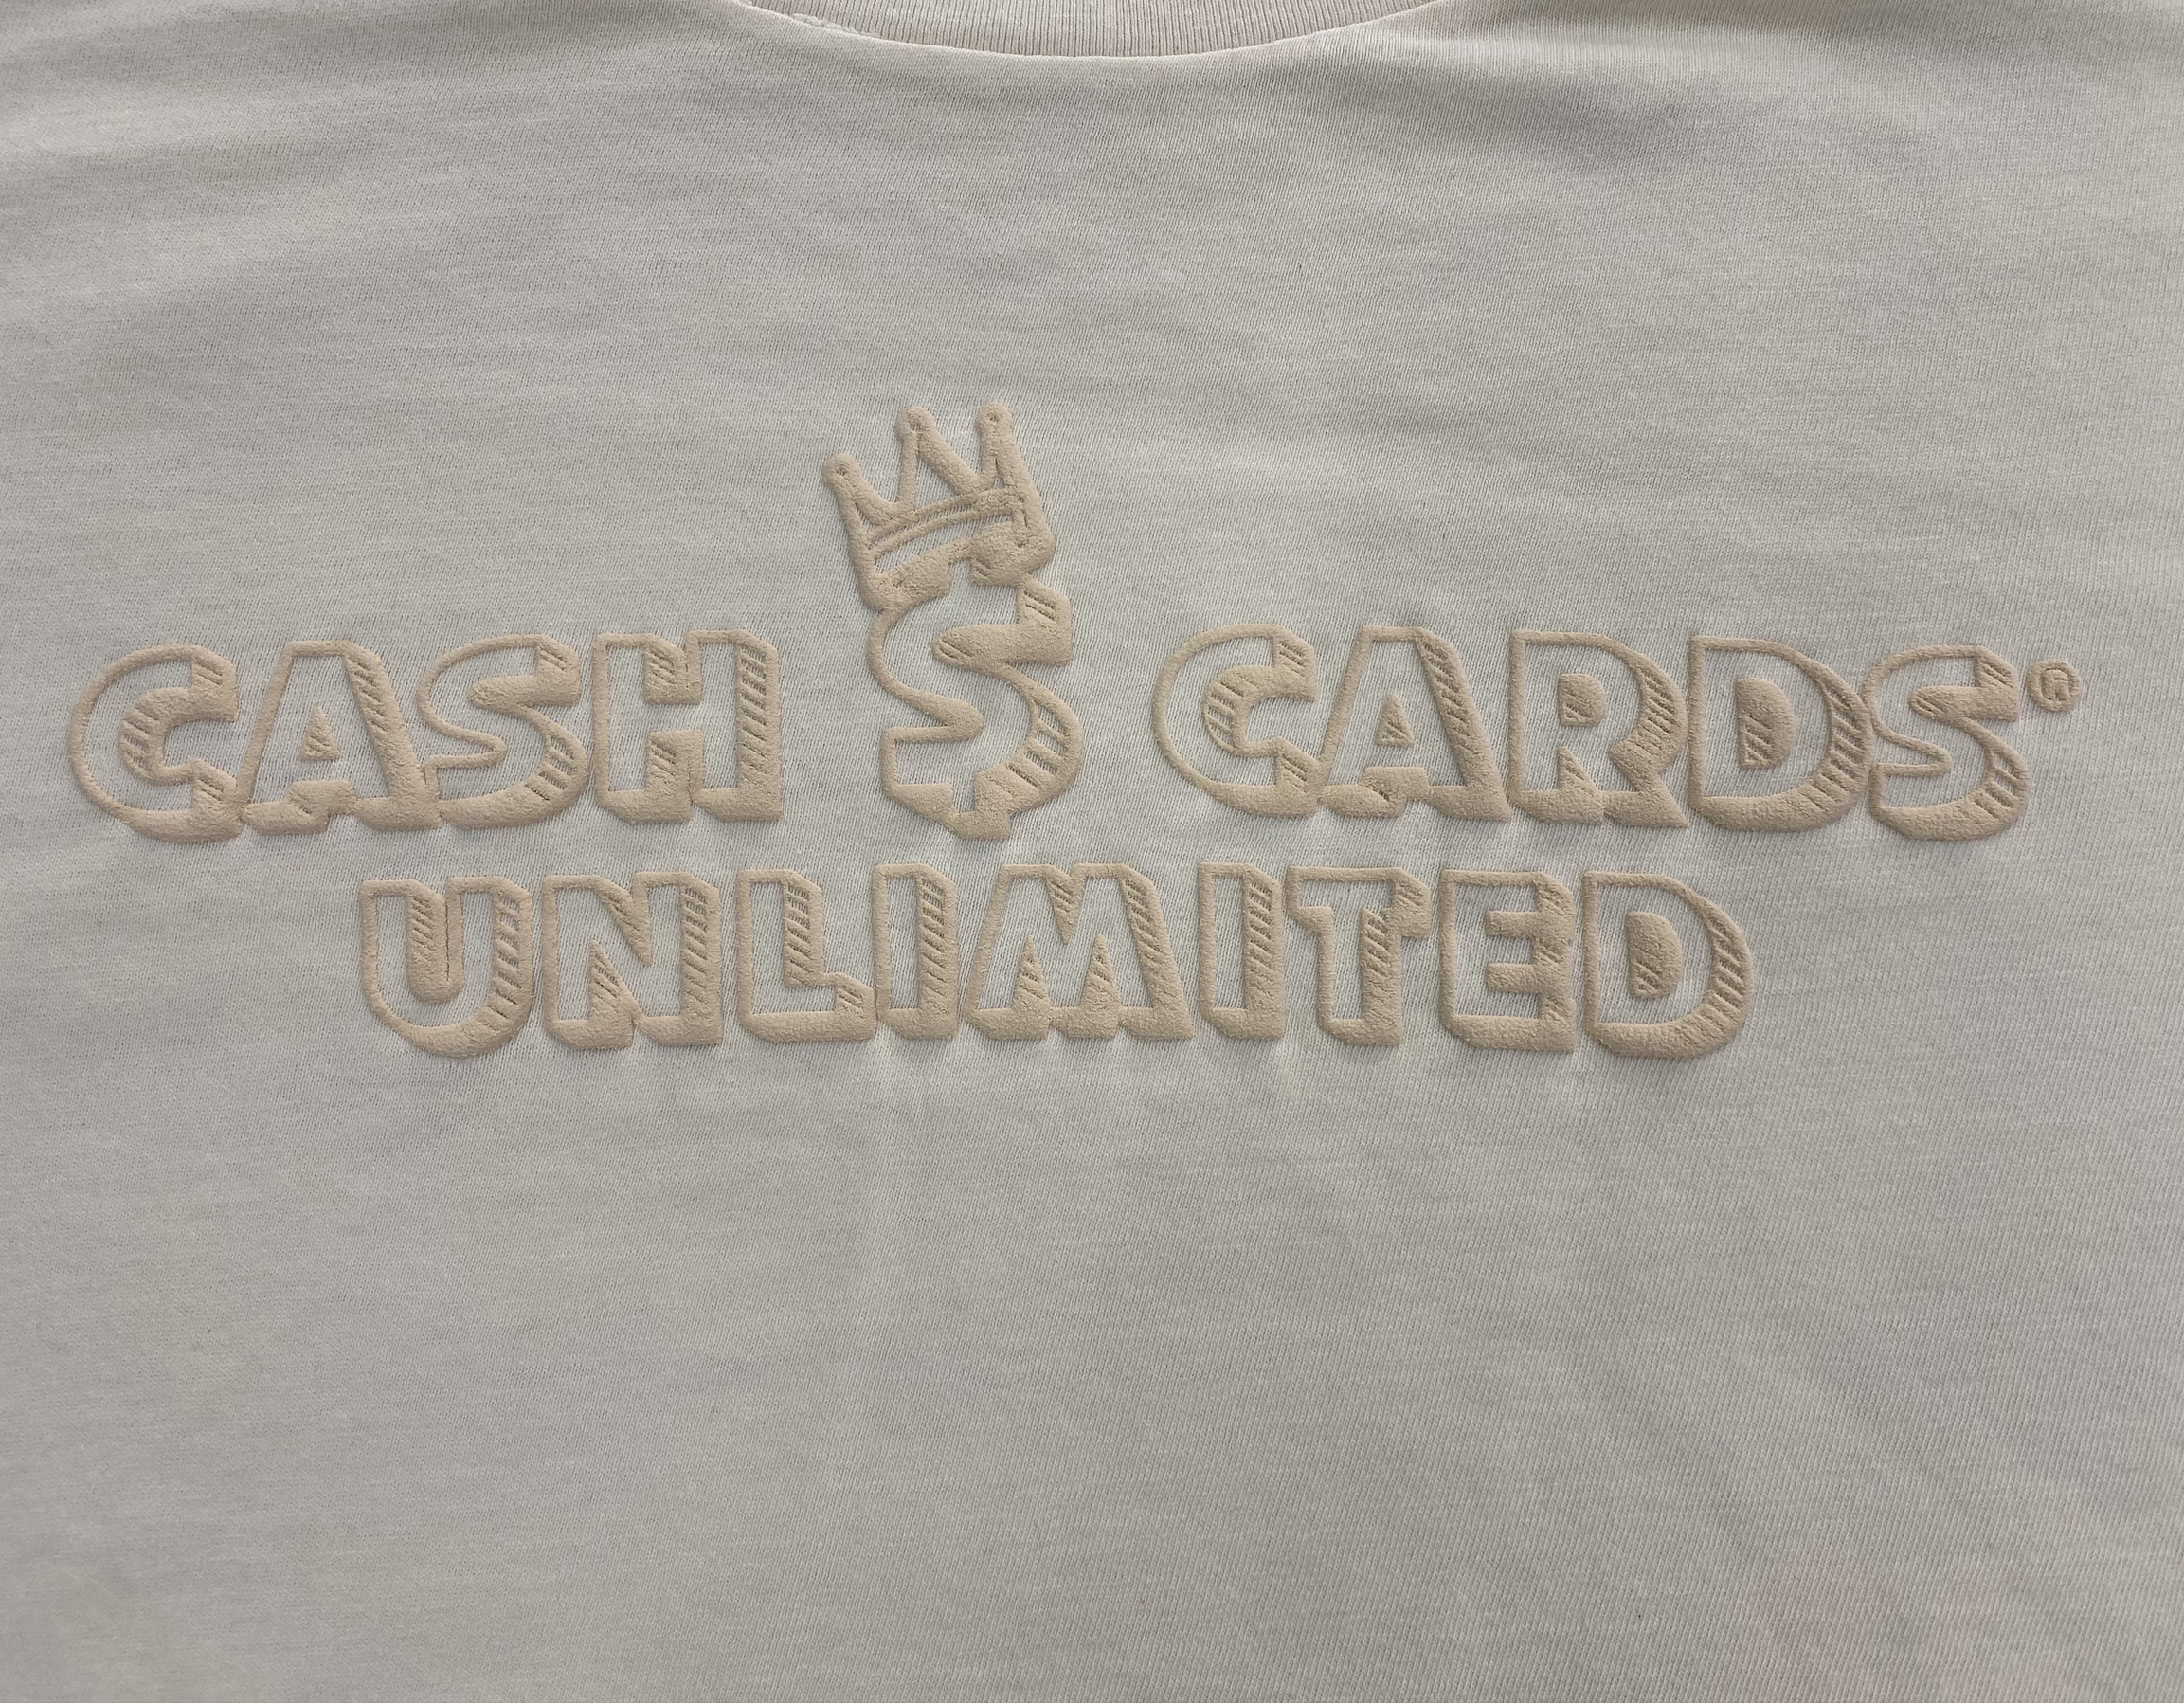 Cash Cards Unlimited Street Wear T-Shirt (Off-White/2X-Large)